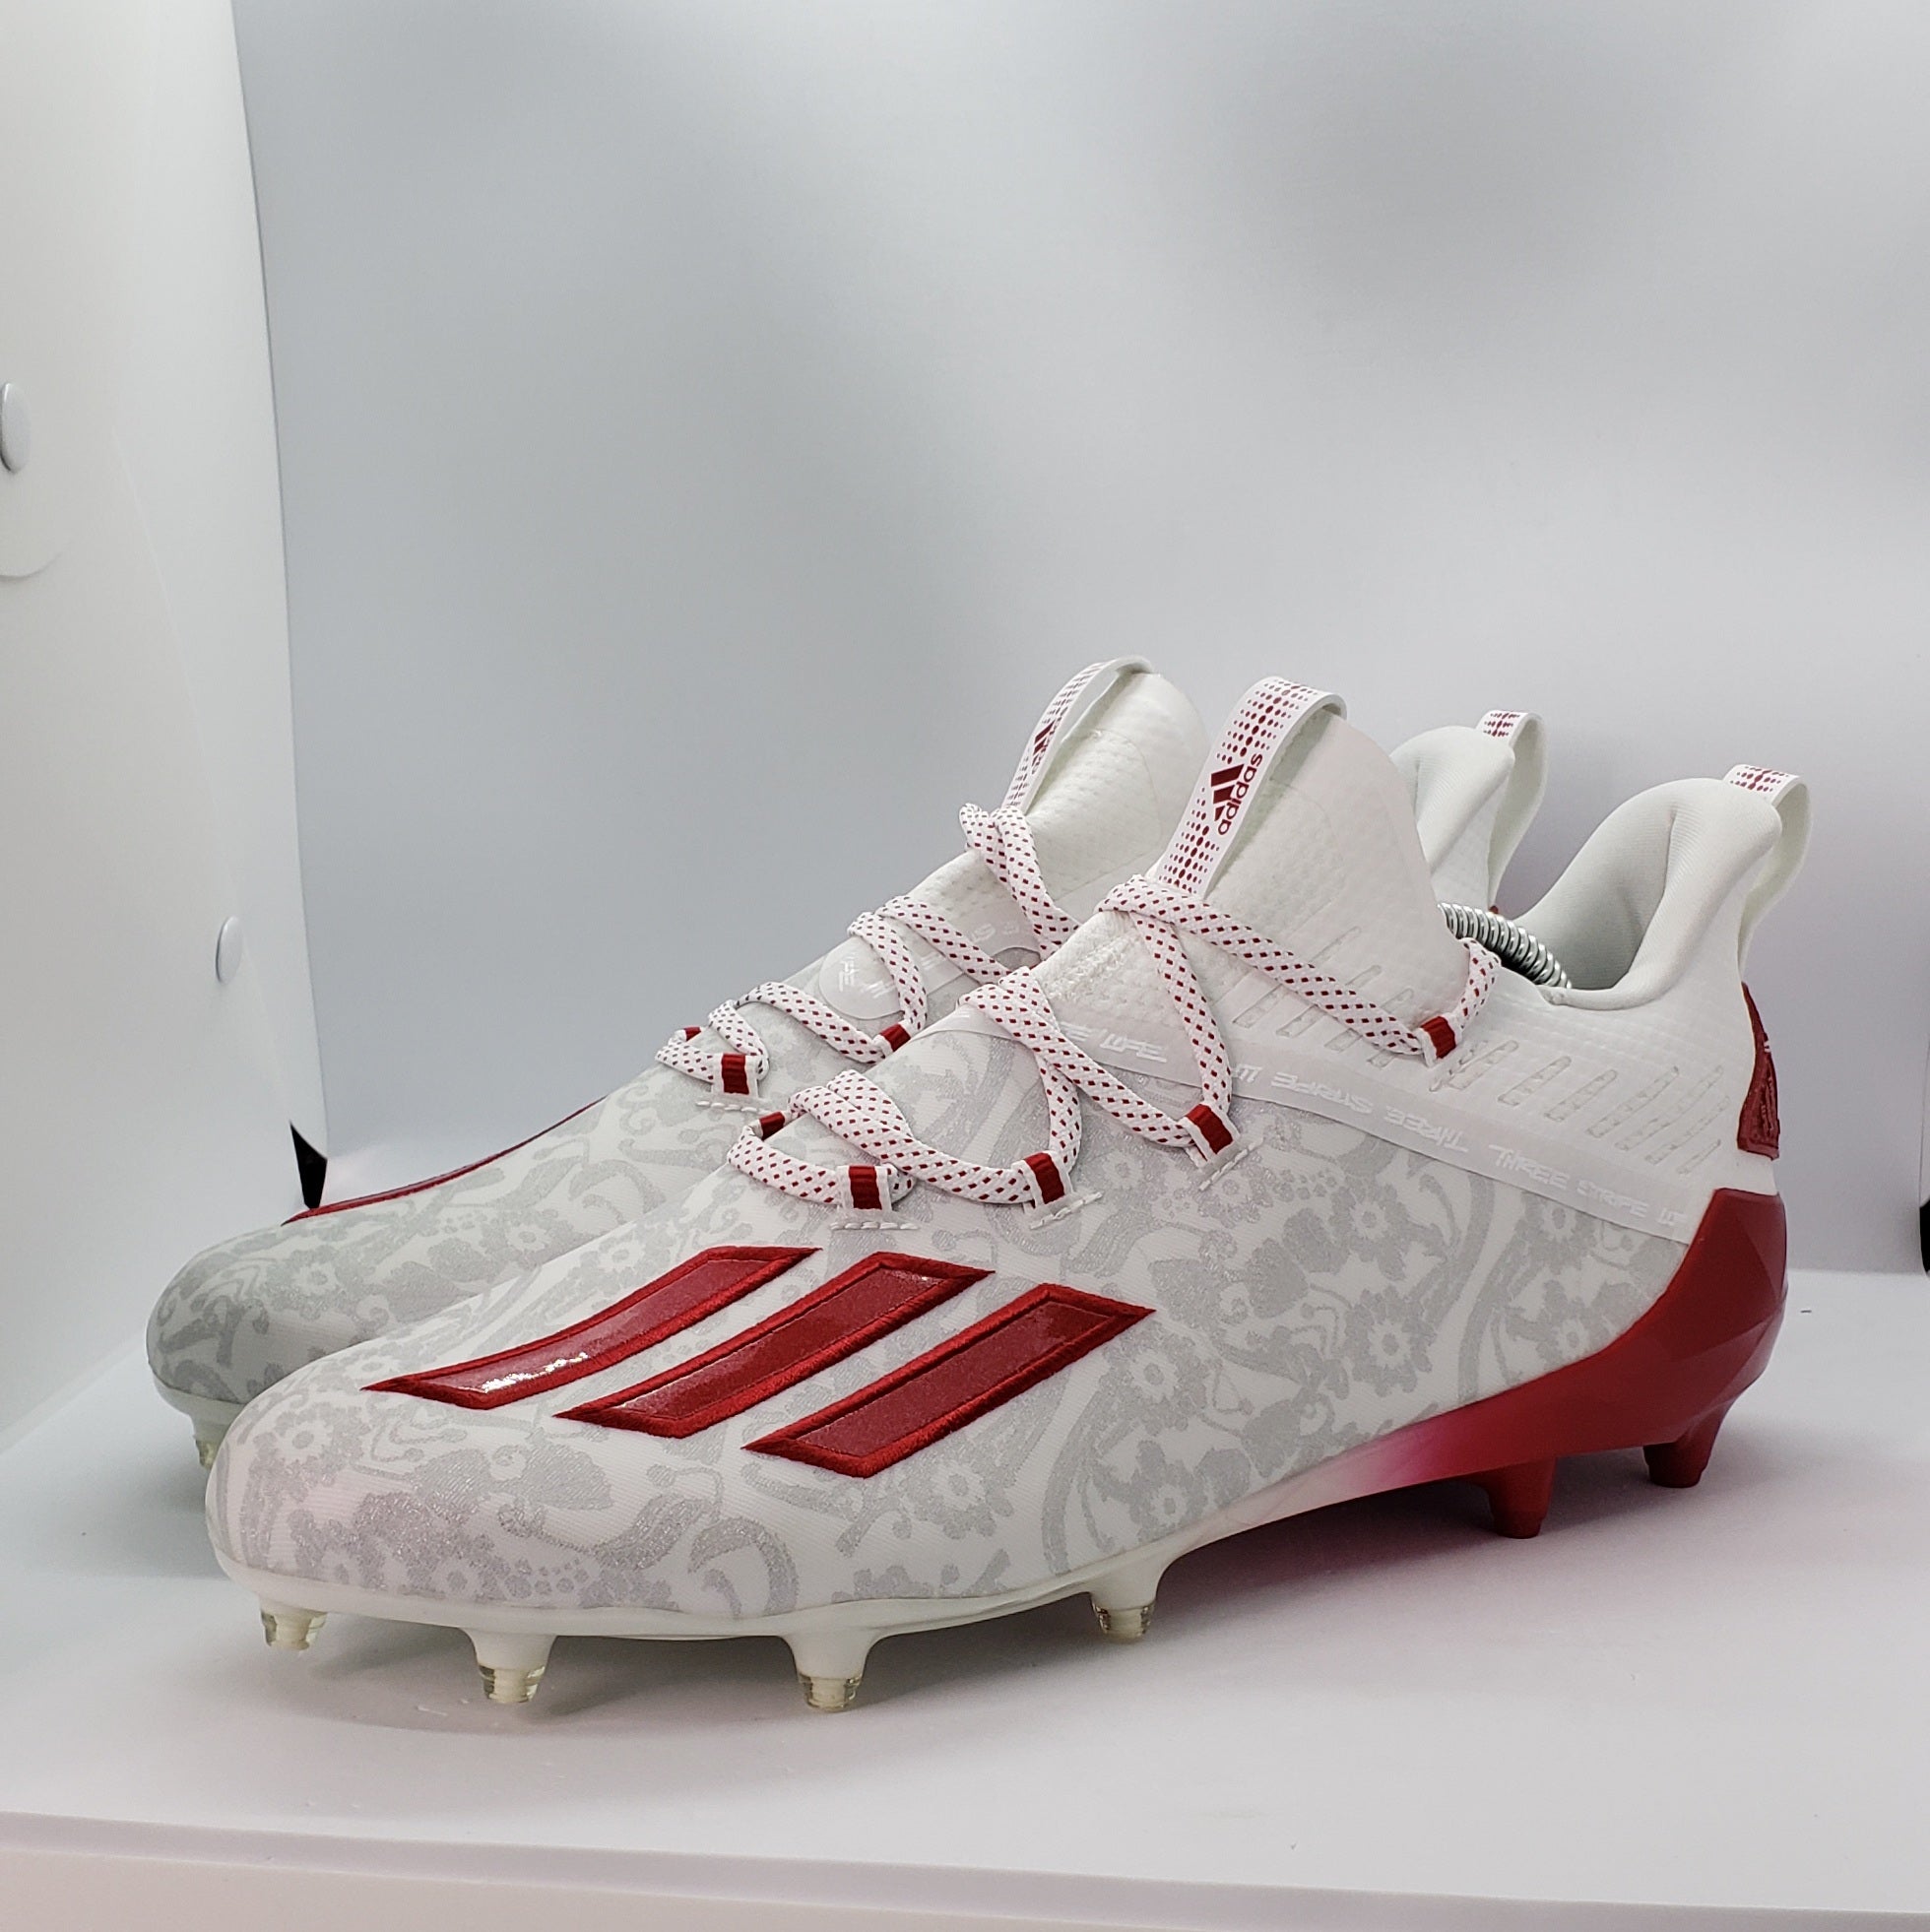 Adidas Adizero Reign Young King Football Cleats FU6708 Floral RED Men's ...